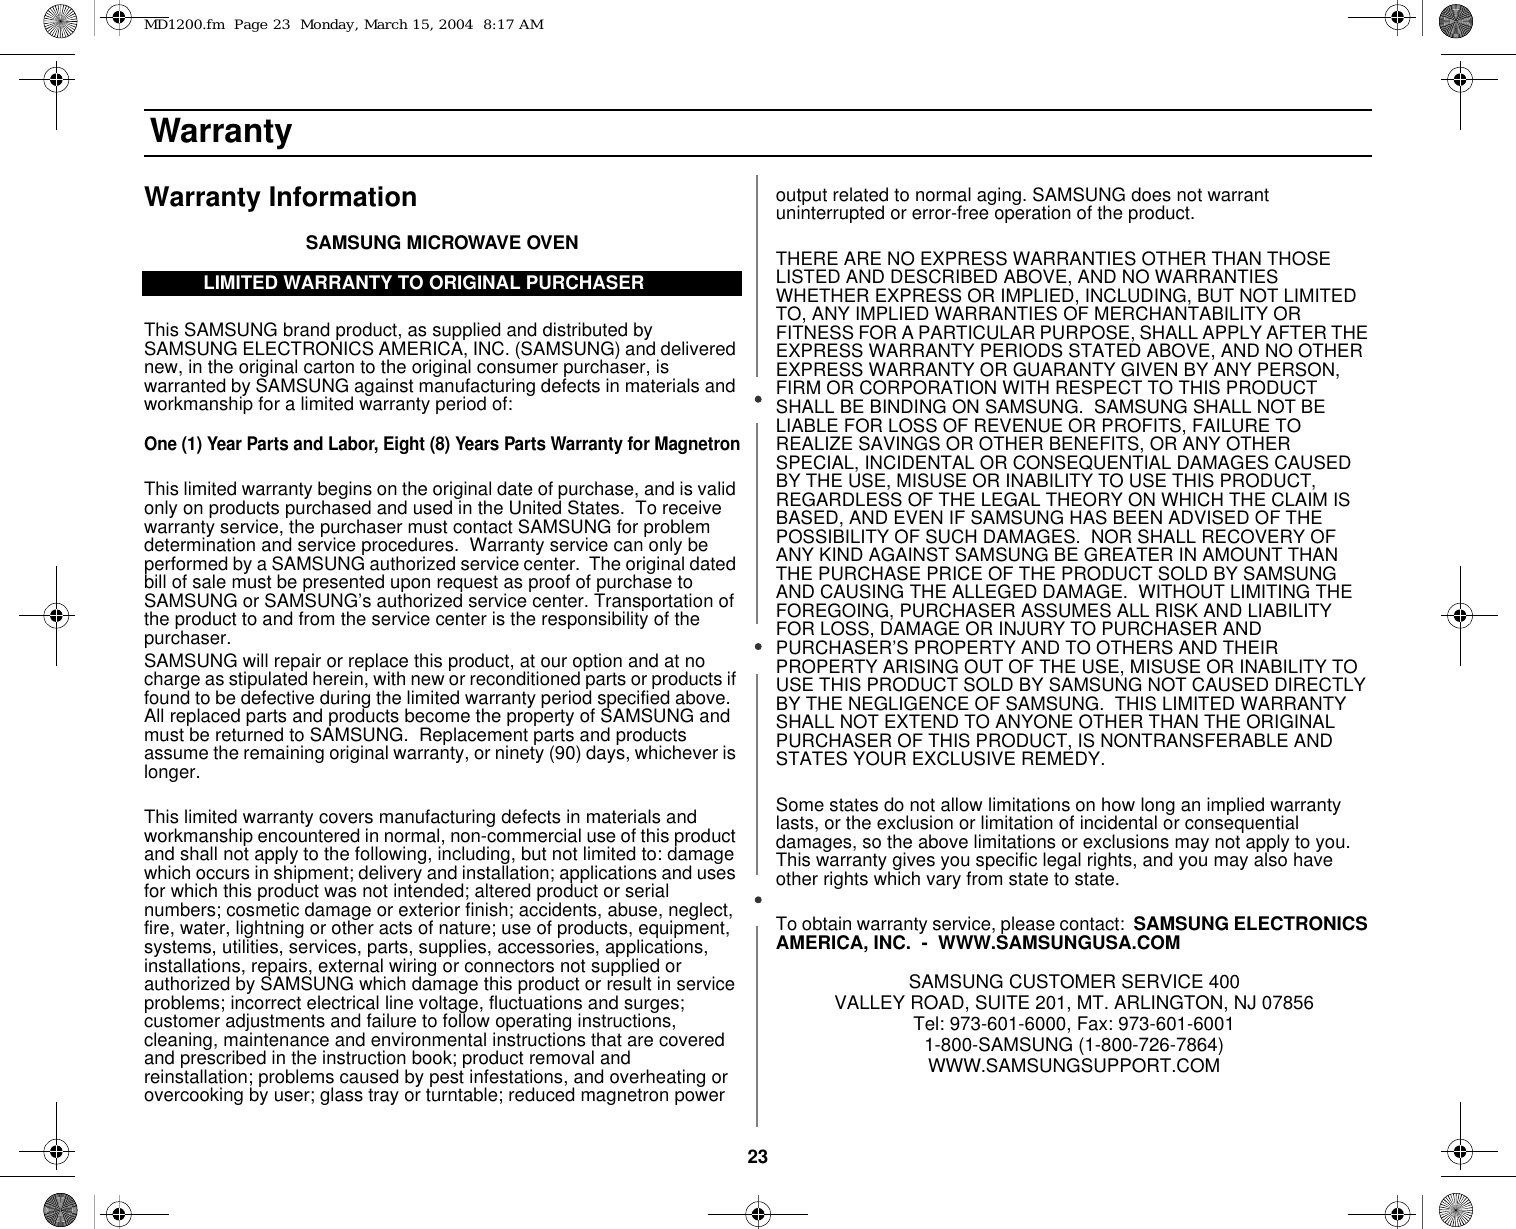 23 WarrantyWarranty InformationSAMSUNG MICROWAVE OVENThis SAMSUNG brand product, as supplied and distributed by SAMSUNG ELECTRONICS AMERICA, INC. (SAMSUNG) and delivered new, in the original carton to the original consumer purchaser, is warranted by SAMSUNG against manufacturing defects in materials and workmanship for a limited warranty period of:One (1) Year Parts and Labor, Eight (8) Years Parts Warranty for MagnetronThis limited warranty begins on the original date of purchase, and is valid only on products purchased and used in the United States.  To receive warranty service, the purchaser must contact SAMSUNG for problem determination and service procedures.  Warranty service can only be performed by a SAMSUNG authorized service center.  The original dated bill of sale must be presented upon request as proof of purchase to SAMSUNG or SAMSUNG’s authorized service center. Transportation of the product to and from the service center is the responsibility of the purchaser.SAMSUNG will repair or replace this product, at our option and at no charge as stipulated herein, with new or reconditioned parts or products if found to be defective during the limited warranty period specified above.  All replaced parts and products become the property of SAMSUNG and must be returned to SAMSUNG.  Replacement parts and products assume the remaining original warranty, or ninety (90) days, whichever is longer.This limited warranty covers manufacturing defects in materials and workmanship encountered in normal, non-commercial use of this product and shall not apply to the following, including, but not limited to: damage which occurs in shipment; delivery and installation; applications and uses for which this product was not intended; altered product or serial numbers; cosmetic damage or exterior finish; accidents, abuse, neglect, fire, water, lightning or other acts of nature; use of products, equipment, systems, utilities, services, parts, supplies, accessories, applications, installations, repairs, external wiring or connectors not supplied or authorized by SAMSUNG which damage this product or result in service problems; incorrect electrical line voltage, fluctuations and surges; customer adjustments and failure to follow operating instructions, cleaning, maintenance and environmental instructions that are covered and prescribed in the instruction book; product removal and reinstallation; problems caused by pest infestations, and overheating or overcooking by user; glass tray or turntable; reduced magnetron power output related to normal aging. SAMSUNG does not warrant uninterrupted or error-free operation of the product.THERE ARE NO EXPRESS WARRANTIES OTHER THAN THOSE LISTED AND DESCRIBED ABOVE, AND NO WARRANTIES WHETHER EXPRESS OR IMPLIED, INCLUDING, BUT NOT LIMITED TO, ANY IMPLIED WARRANTIES OF MERCHANTABILITY OR FITNESS FOR A PARTICULAR PURPOSE, SHALL APPLY AFTER THE EXPRESS WARRANTY PERIODS STATED ABOVE, AND NO OTHER EXPRESS WARRANTY OR GUARANTY GIVEN BY ANY PERSON, FIRM OR CORPORATION WITH RESPECT TO THIS PRODUCT SHALL BE BINDING ON SAMSUNG.  SAMSUNG SHALL NOT BE LIABLE FOR LOSS OF REVENUE OR PROFITS, FAILURE TO REALIZE SAVINGS OR OTHER BENEFITS, OR ANY OTHER SPECIAL, INCIDENTAL OR CONSEQUENTIAL DAMAGES CAUSED BY THE USE, MISUSE OR INABILITY TO USE THIS PRODUCT, REGARDLESS OF THE LEGAL THEORY ON WHICH THE CLAIM IS BASED, AND EVEN IF SAMSUNG HAS BEEN ADVISED OF THE POSSIBILITY OF SUCH DAMAGES.  NOR SHALL RECOVERY OF ANY KIND AGAINST SAMSUNG BE GREATER IN AMOUNT THAN THE PURCHASE PRICE OF THE PRODUCT SOLD BY SAMSUNG AND CAUSING THE ALLEGED DAMAGE.  WITHOUT LIMITING THE FOREGOING, PURCHASER ASSUMES ALL RISK AND LIABILITY FOR LOSS, DAMAGE OR INJURY TO PURCHASER AND PURCHASER’S PROPERTY AND TO OTHERS AND THEIR PROPERTY ARISING OUT OF THE USE, MISUSE OR INABILITY TO USE THIS PRODUCT SOLD BY SAMSUNG NOT CAUSED DIRECTLY BY THE NEGLIGENCE OF SAMSUNG.  THIS LIMITED WARRANTY SHALL NOT EXTEND TO ANYONE OTHER THAN THE ORIGINAL PURCHASER OF THIS PRODUCT, IS NONTRANSFERABLE AND STATES YOUR EXCLUSIVE REMEDY.Some states do not allow limitations on how long an implied warranty lasts, or the exclusion or limitation of incidental or consequential damages, so the above limitations or exclusions may not apply to you.  This warranty gives you specific legal rights, and you may also have other rights which vary from state to state.To obtain warranty service, please contact:  SAMSUNG ELECTRONICS AMERICA, INC.  -  WWW.SAMSUNGUSA.COMSAMSUNG CUSTOMER SERVICE 400 VALLEY ROAD, SUITE 201, MT. ARLINGTON, NJ 07856Tel: 973-601-6000, Fax: 973-601-60011-800-SAMSUNG (1-800-726-7864)WWW.SAMSUNGSUPPORT.COMLIMITED WARRANTY TO ORIGINAL PURCHASERMD1200.fm  Page 23  Monday, March 15, 2004  8:17 AM